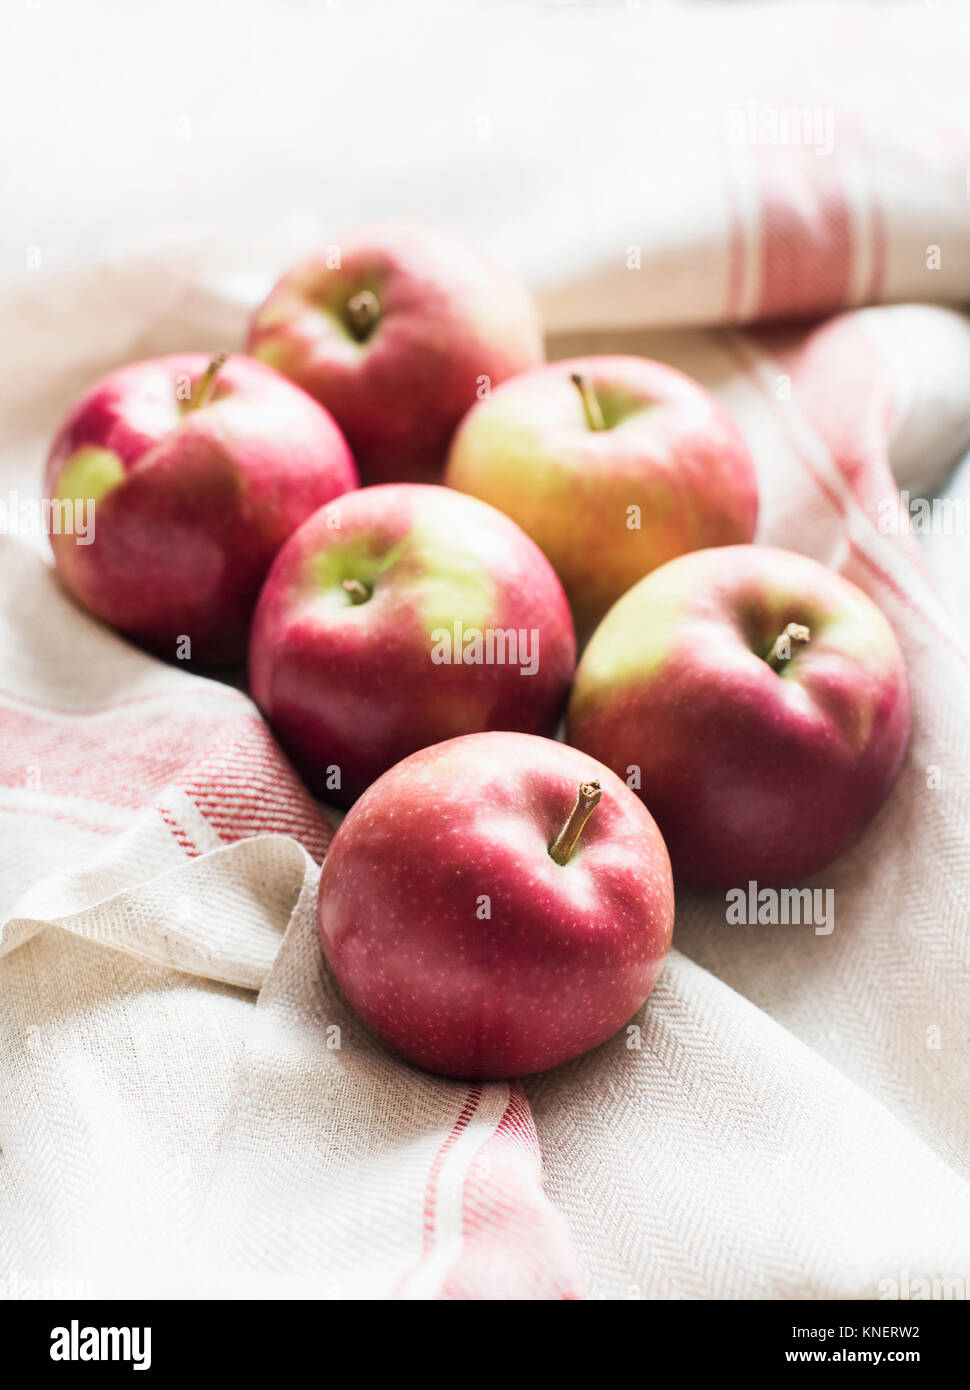 Four Apples - One Big Apple From Shop And Three Homemade Small Apples All  On White Background Stock Photo, Picture and Royalty Free Image. Image  60165001.